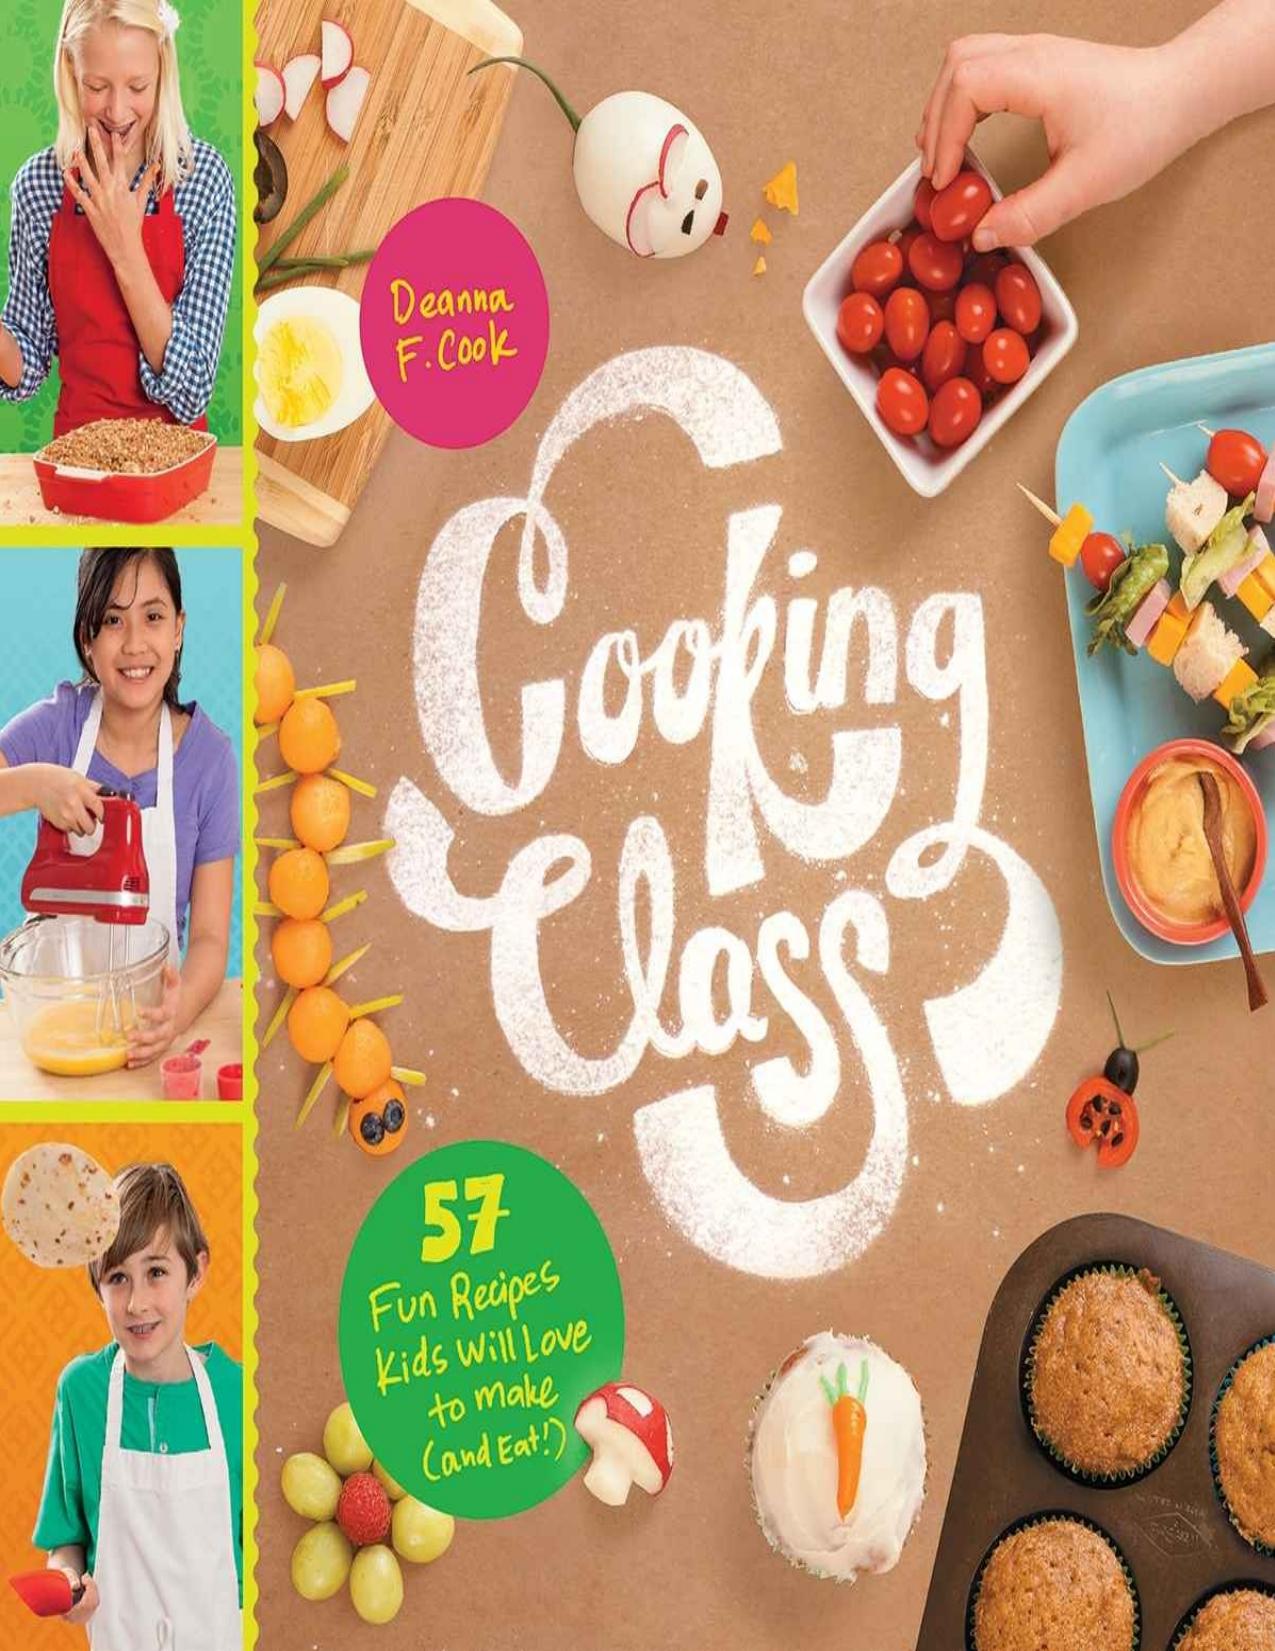 Cooking Class: 57 Fun Recipes Kids Will Love to Make (and Eat!) by Deanna F. Cook